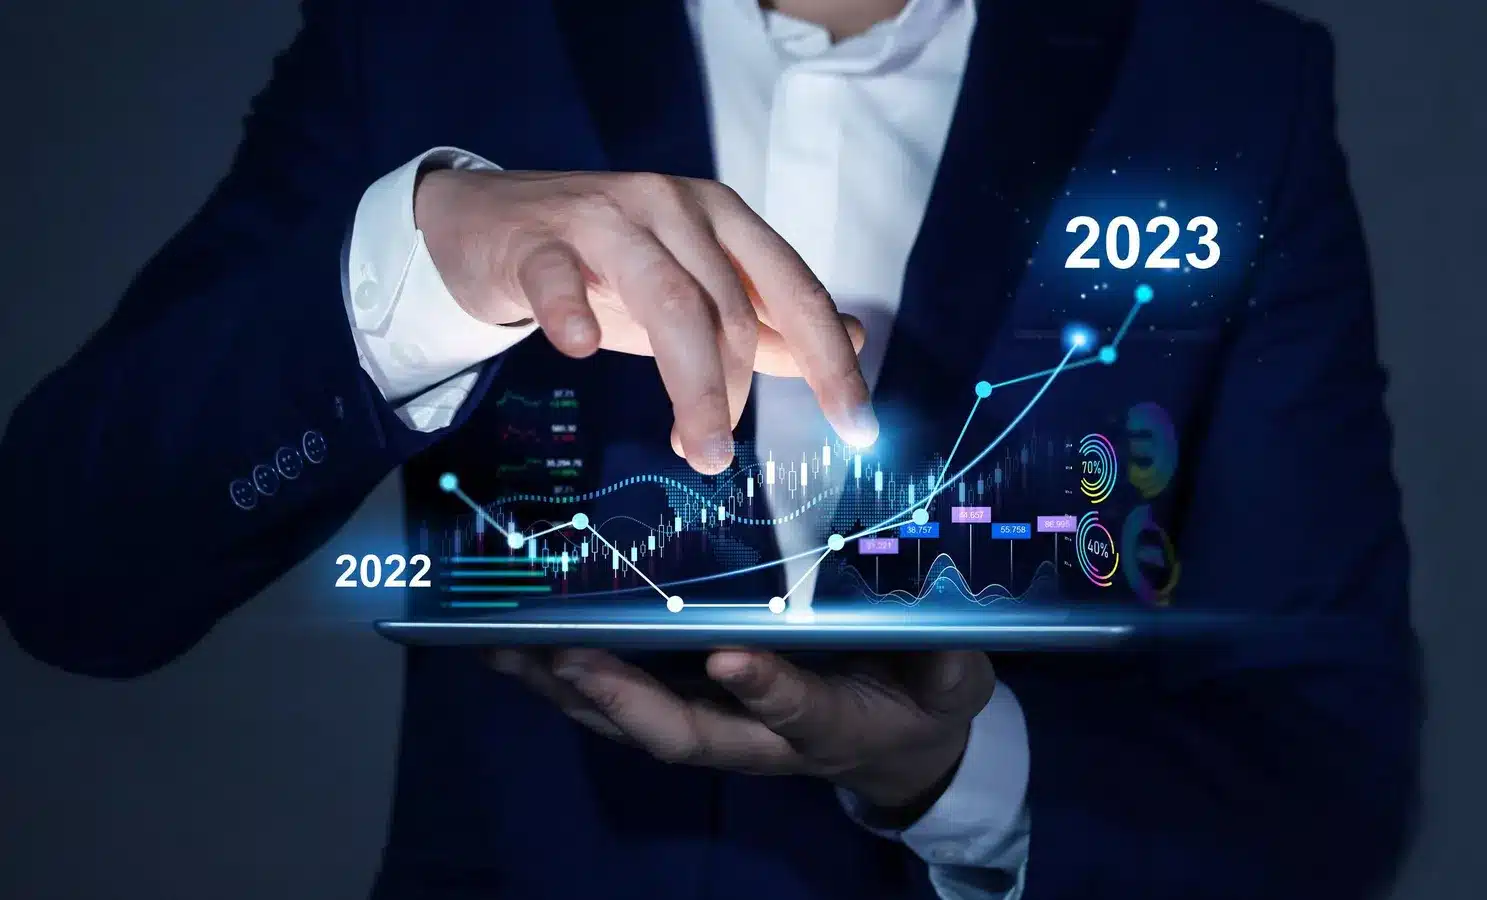 Top 5 Emerging Technologies To Watch In 2023